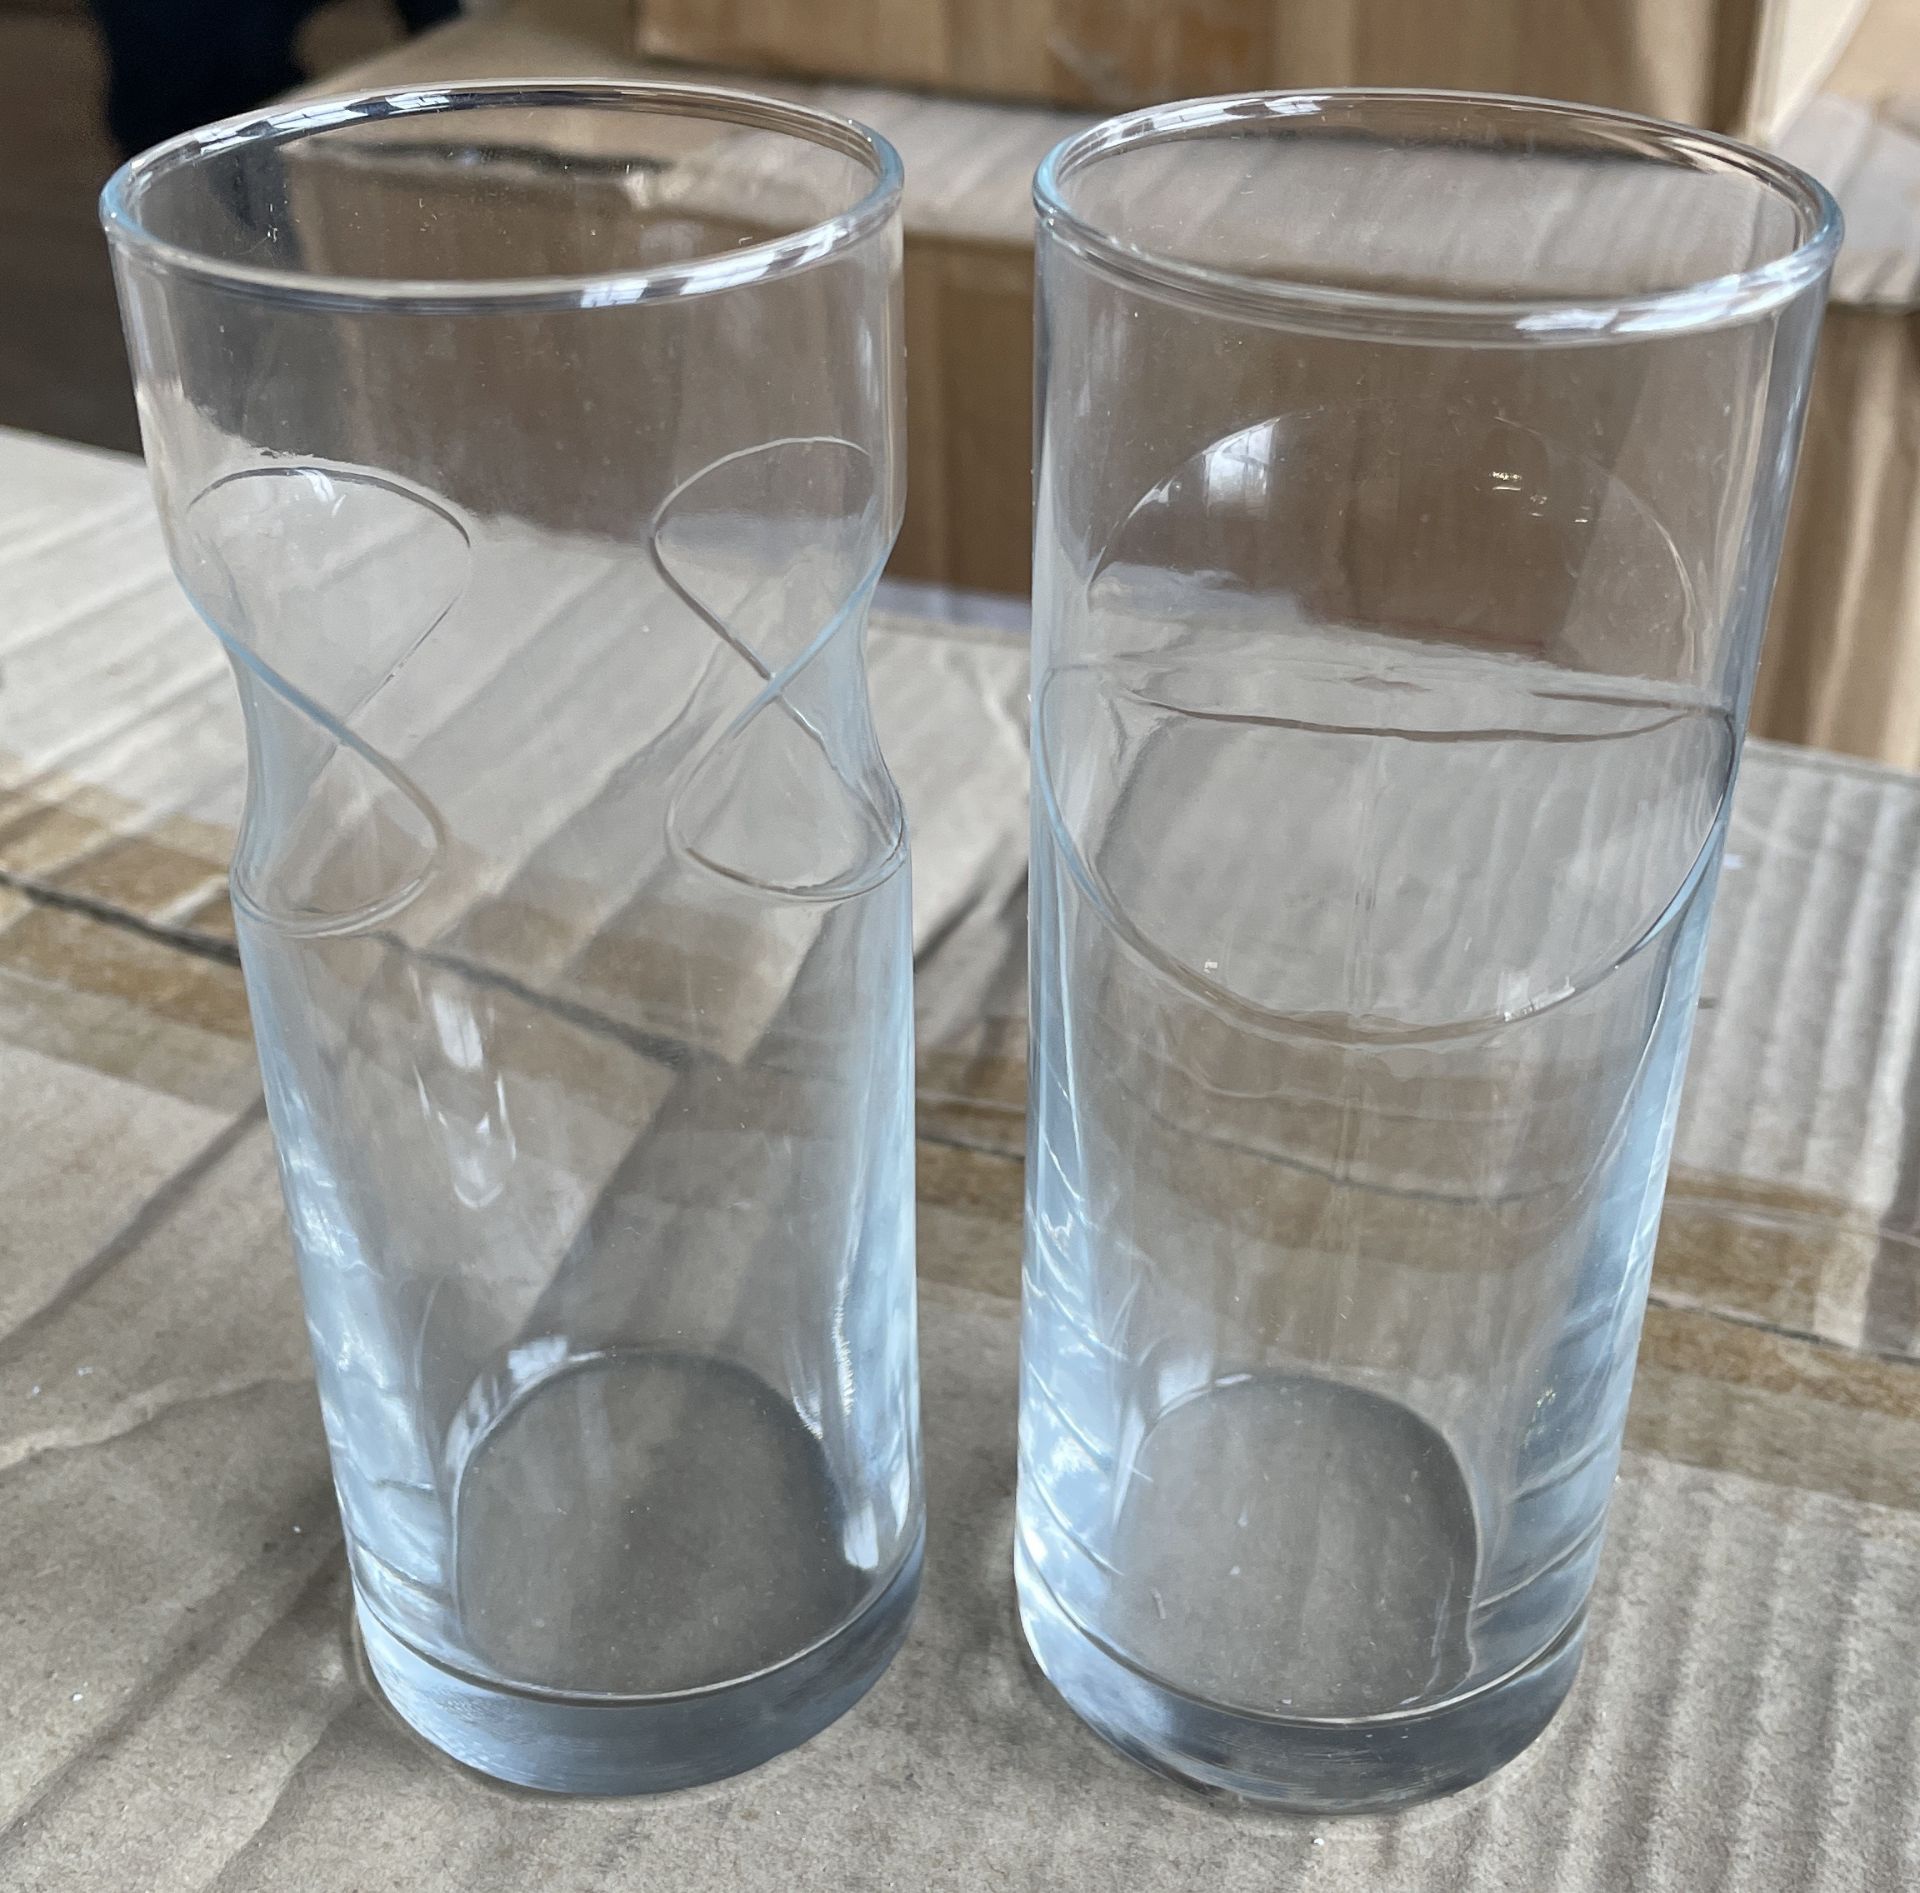 Job lot of Glasses, Whiskey tumblers, shot glasses & more - over 4000 - see description for contents - Image 8 of 13